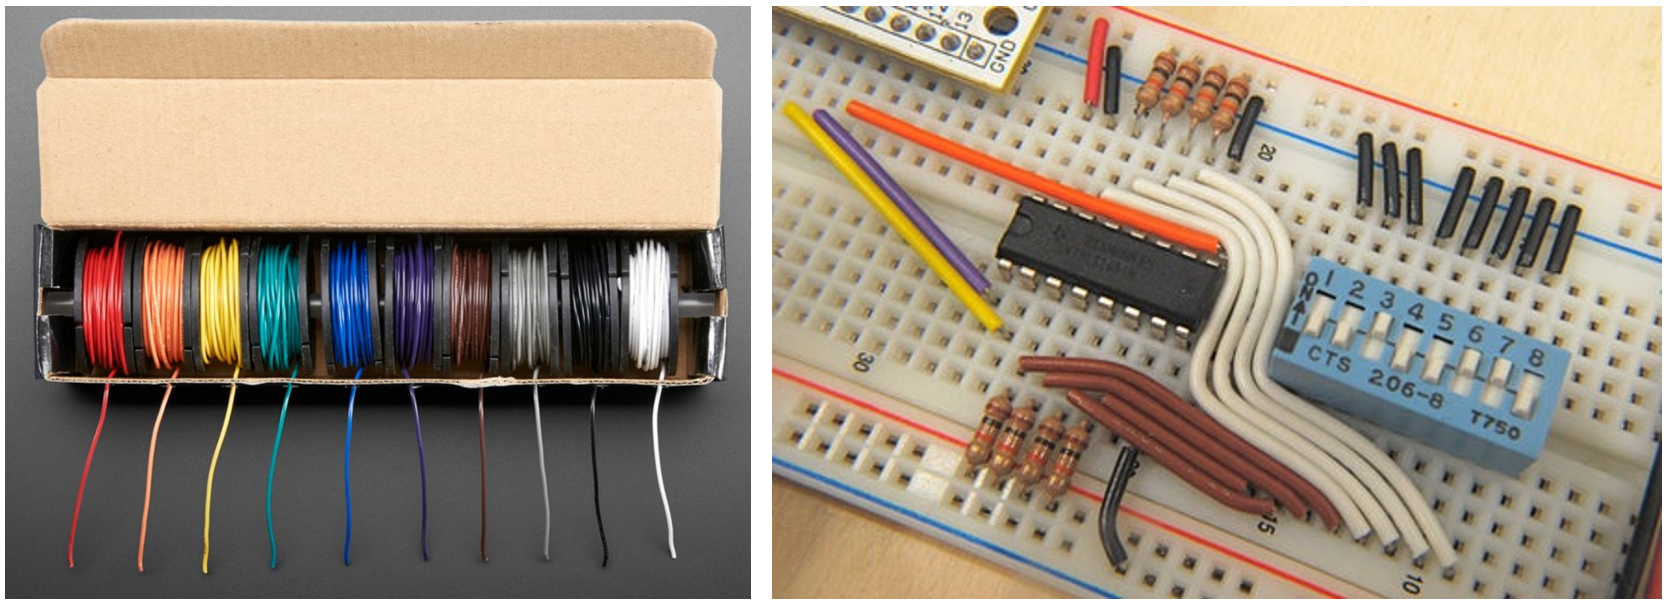 A picture of a box of AWG circuit prototyping wire and a complementary image showing that wire being used in a breadboard